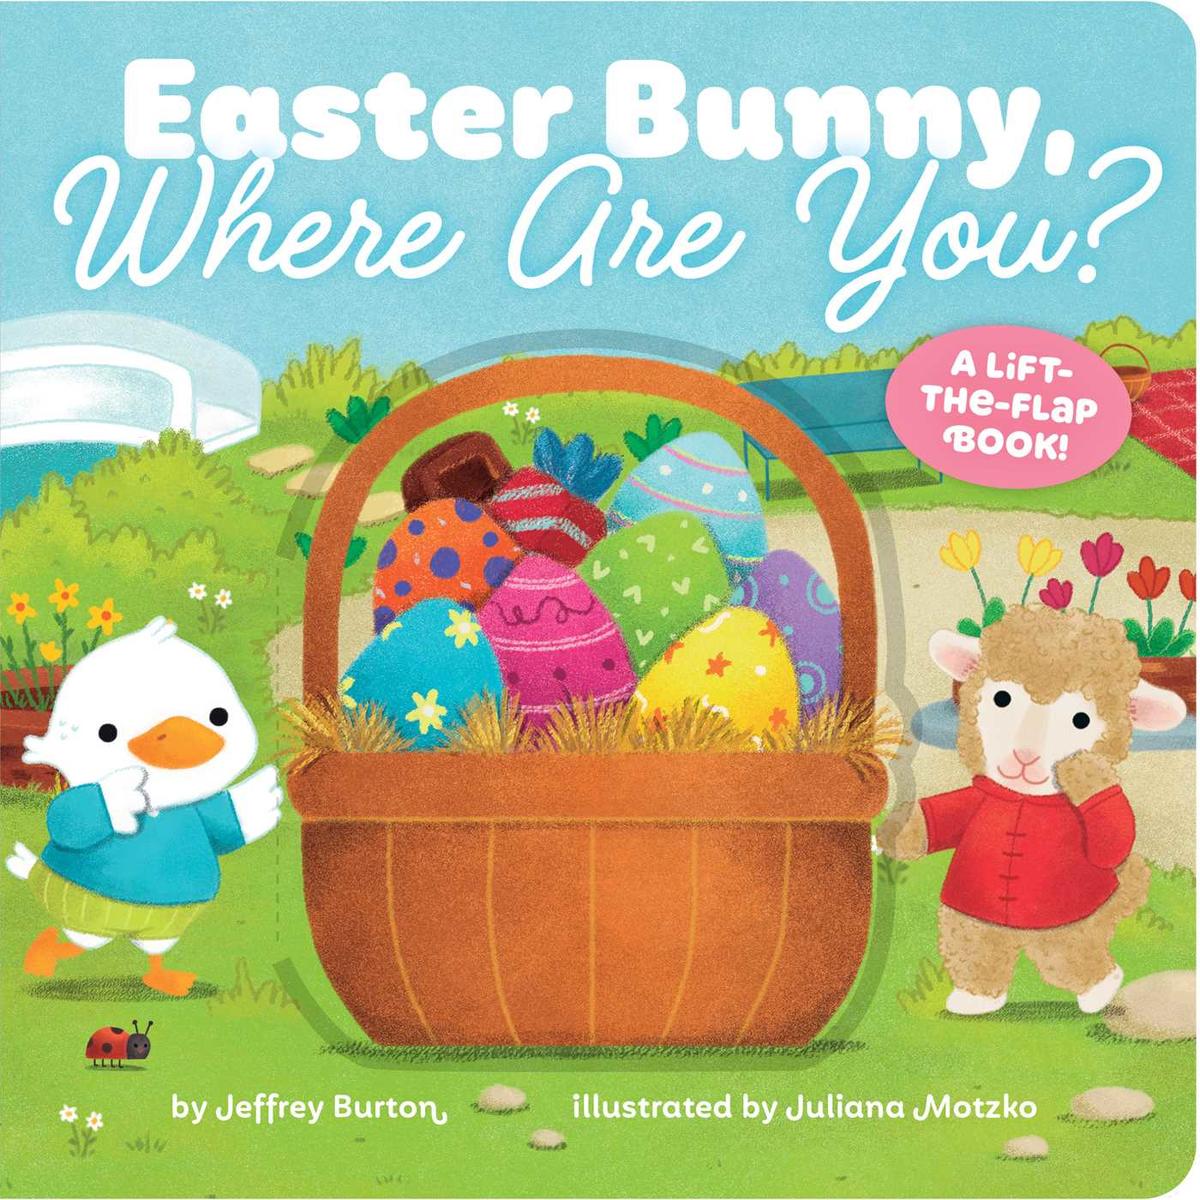 Easter Bunny, Where Are You? - A Lift-the-Flap Book!